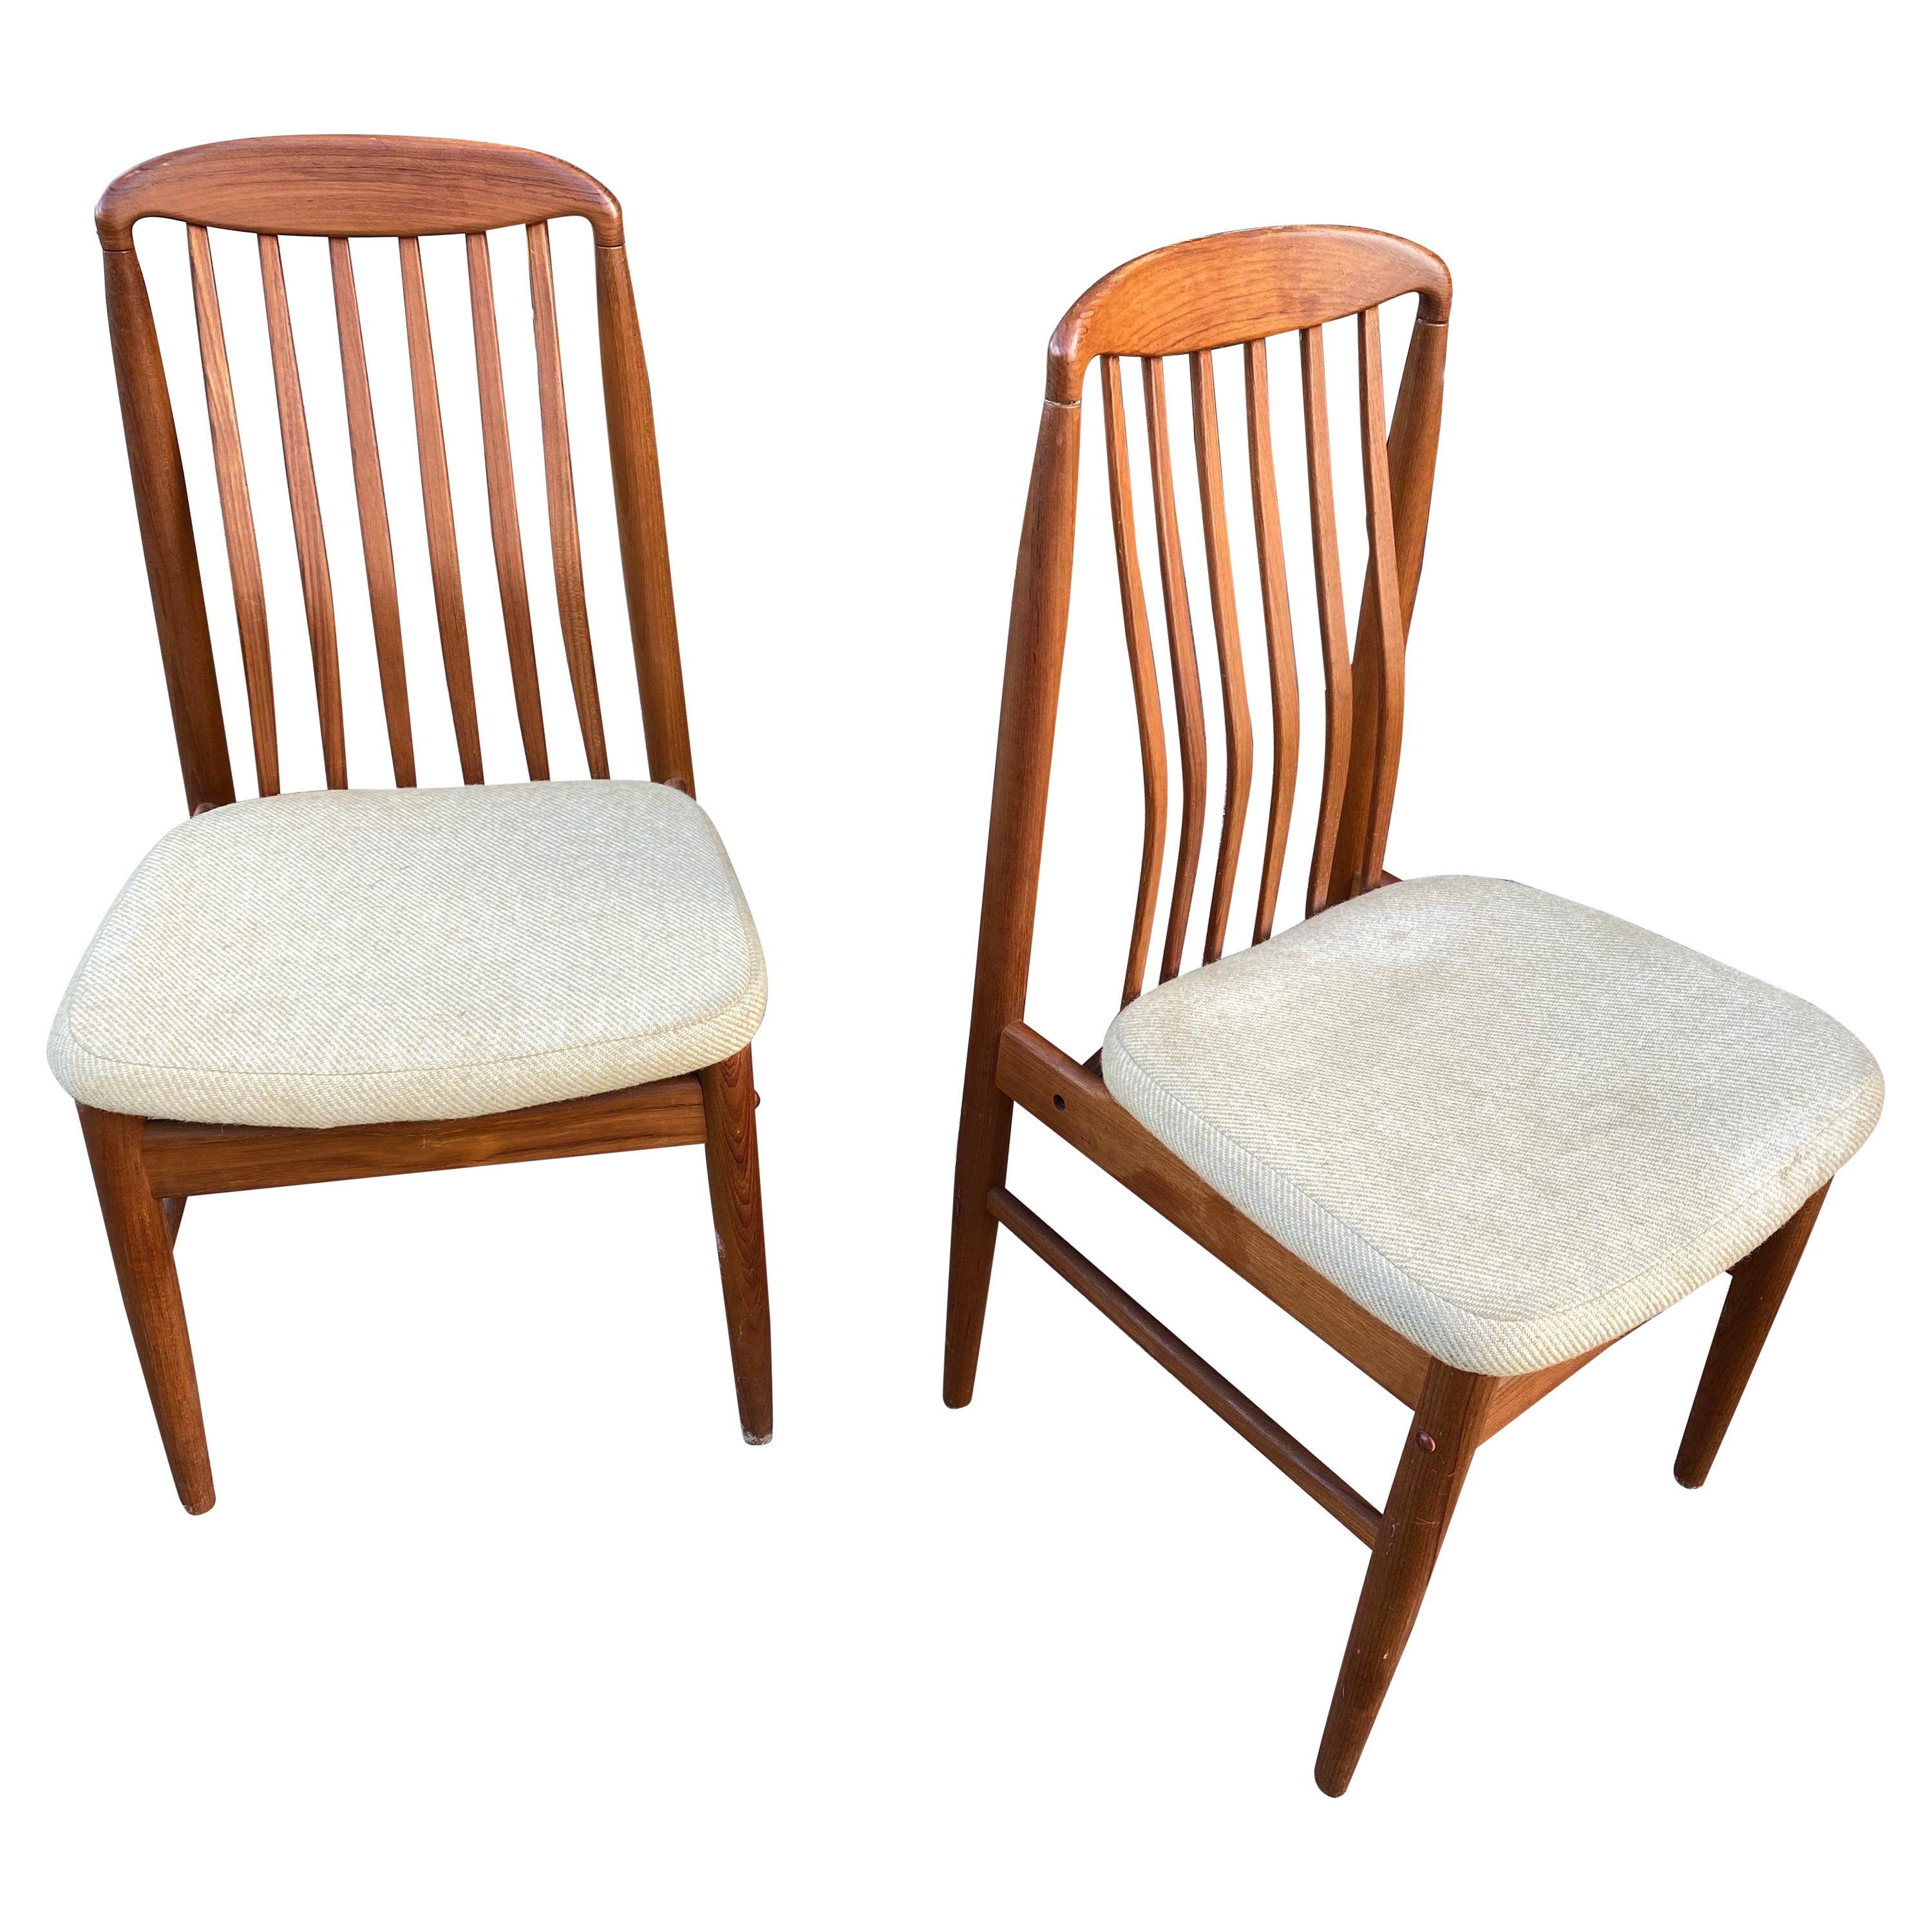 Pair of Benny Linden Teak Dining Chairs